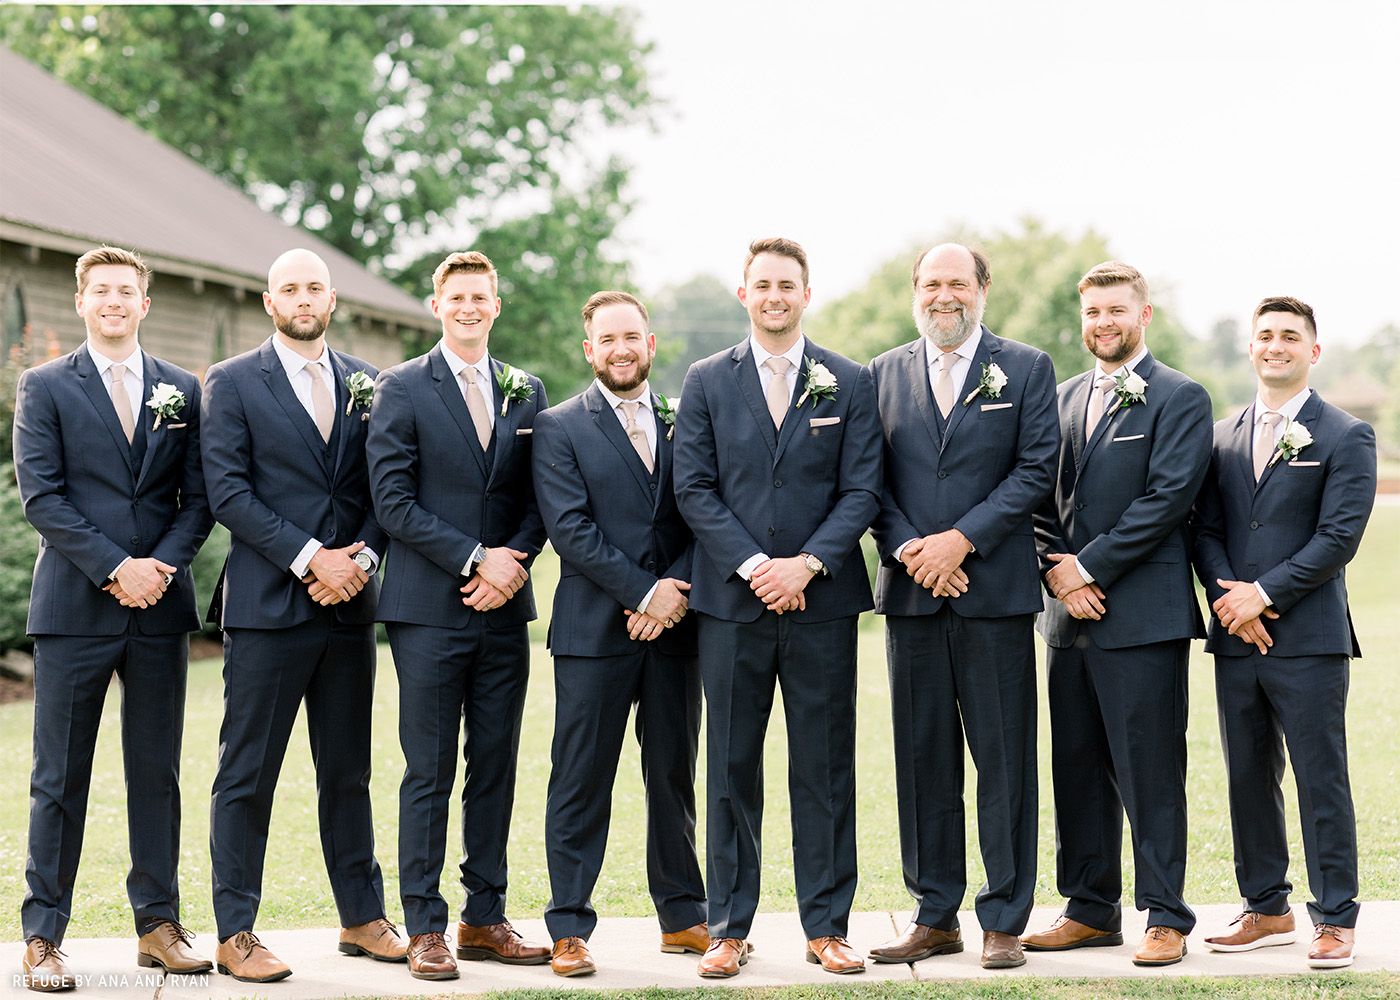 Wedding suit and tuxedo rentals from Generation Tux.